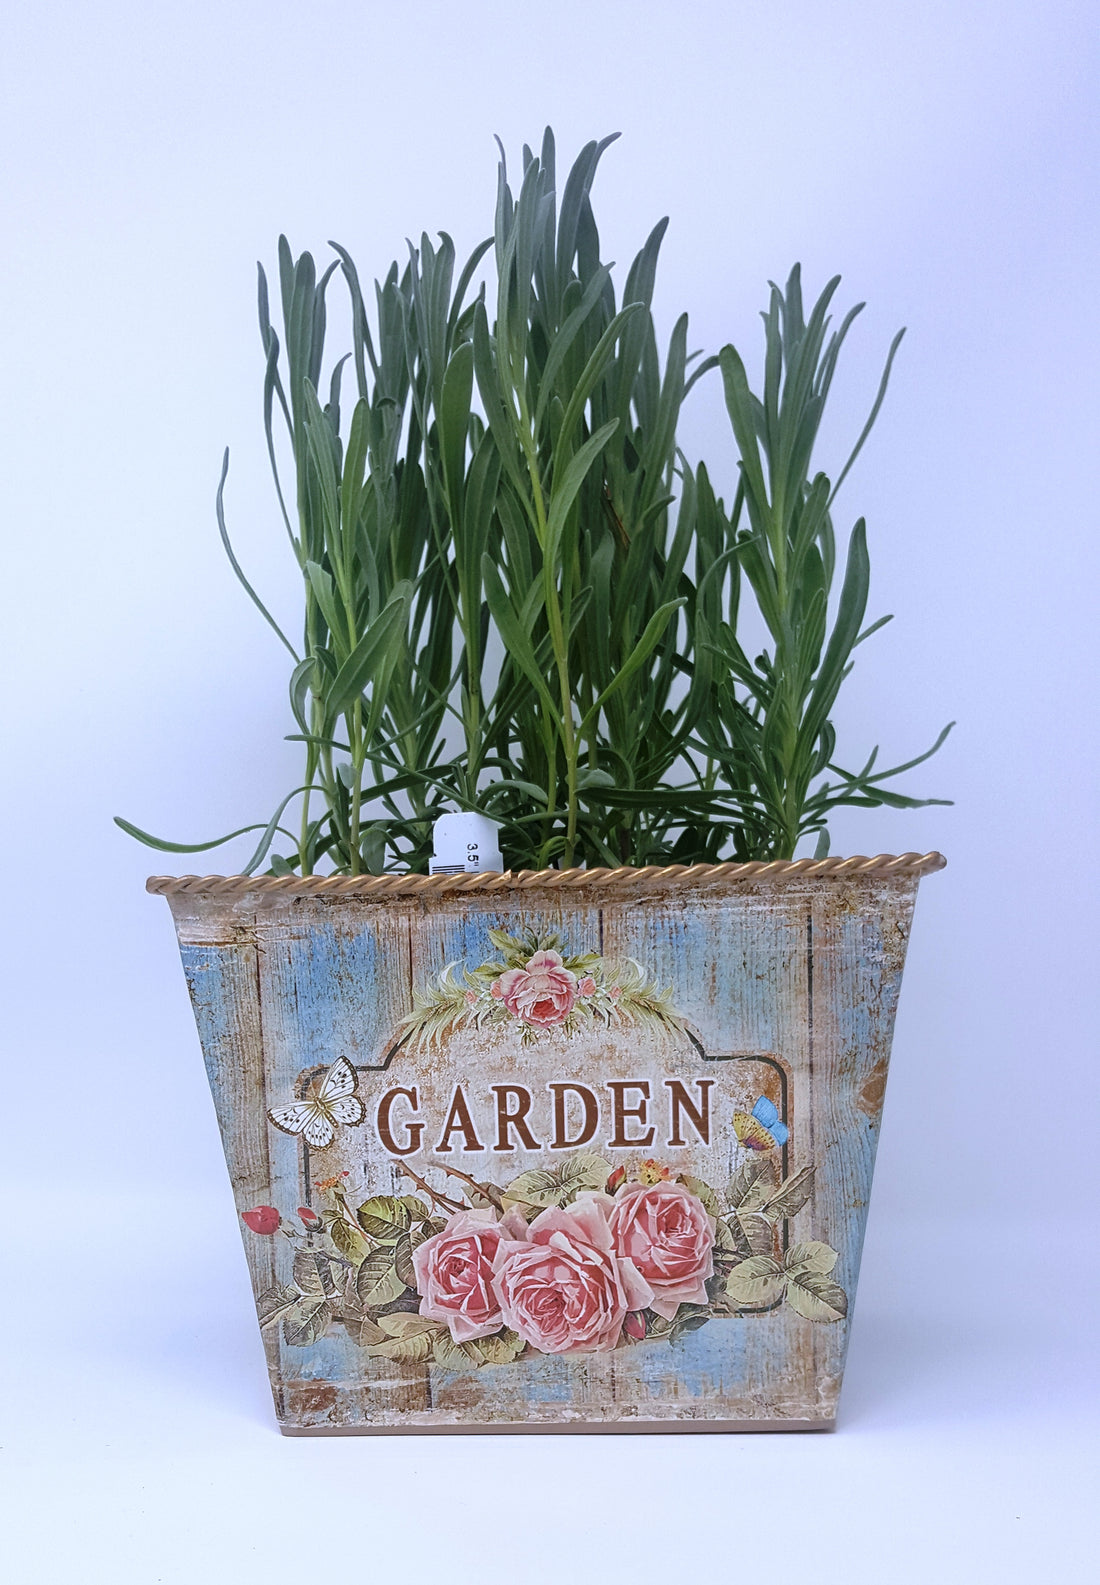 Gift Planters - Include Plant and Planter - Findlavender